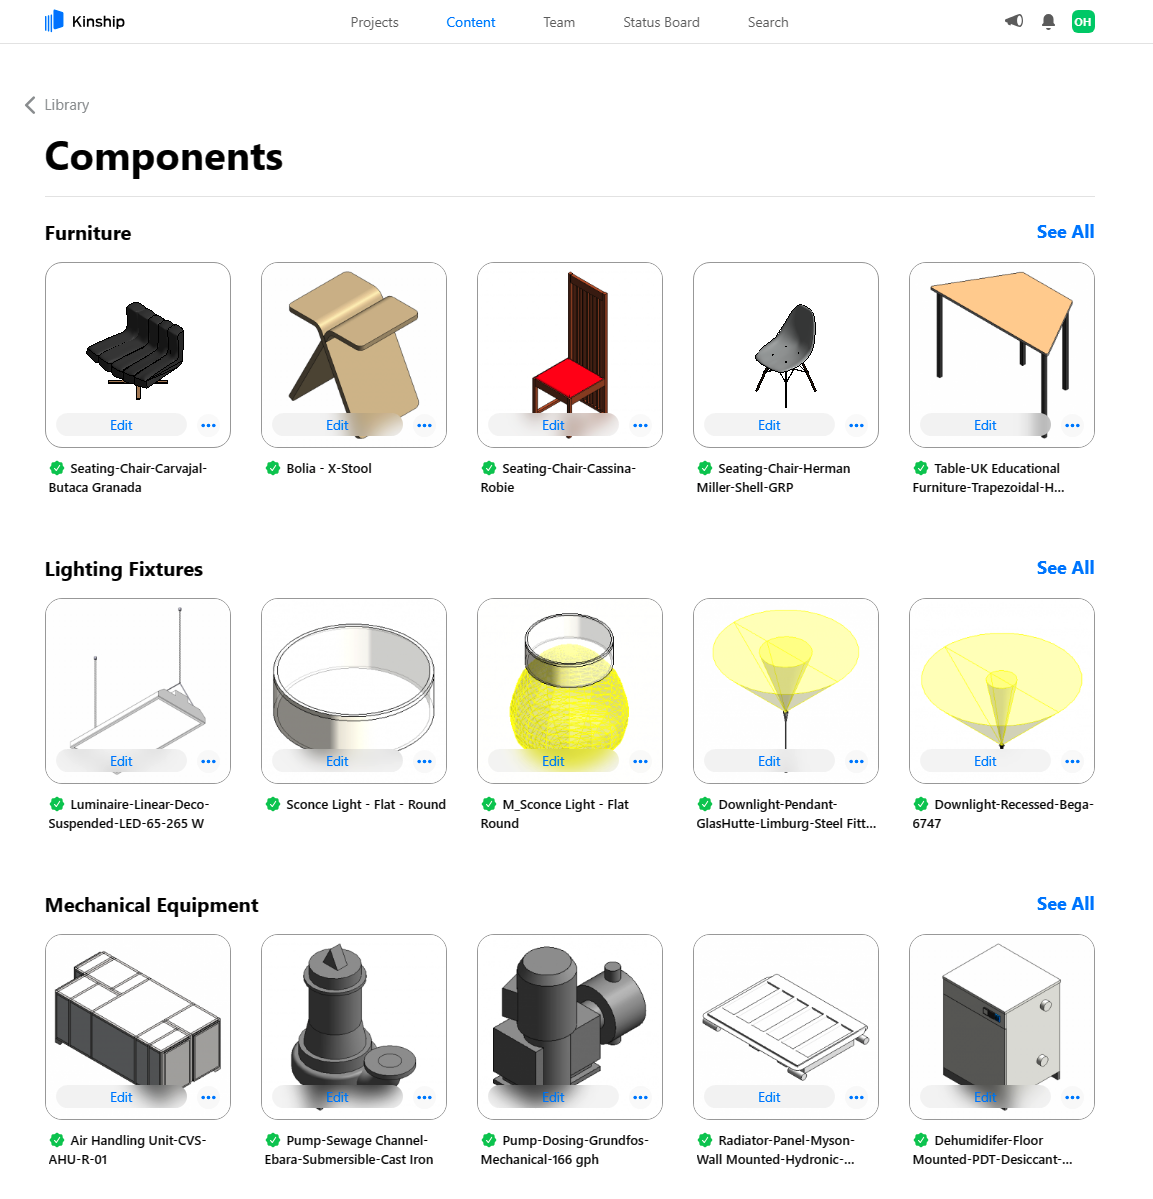 Screenshot of components library showing the furnitue, lighting fixtures and mechanical equipment collections.